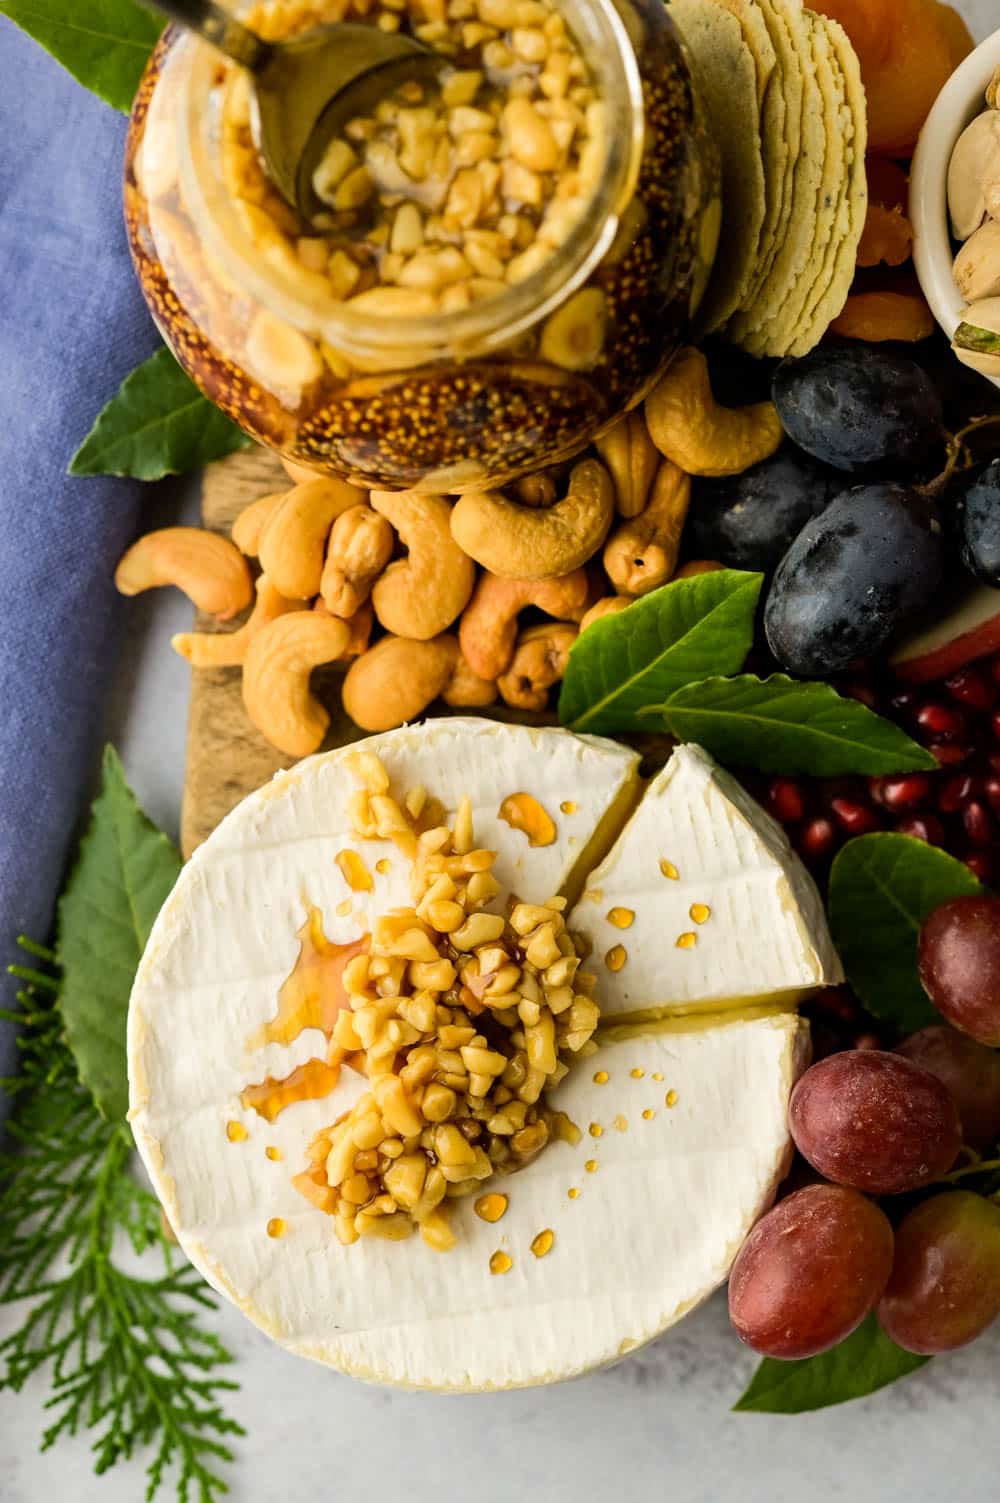 best cheeses for cheese board starts with everyone's favorite brie, topped with honeyed nuts.